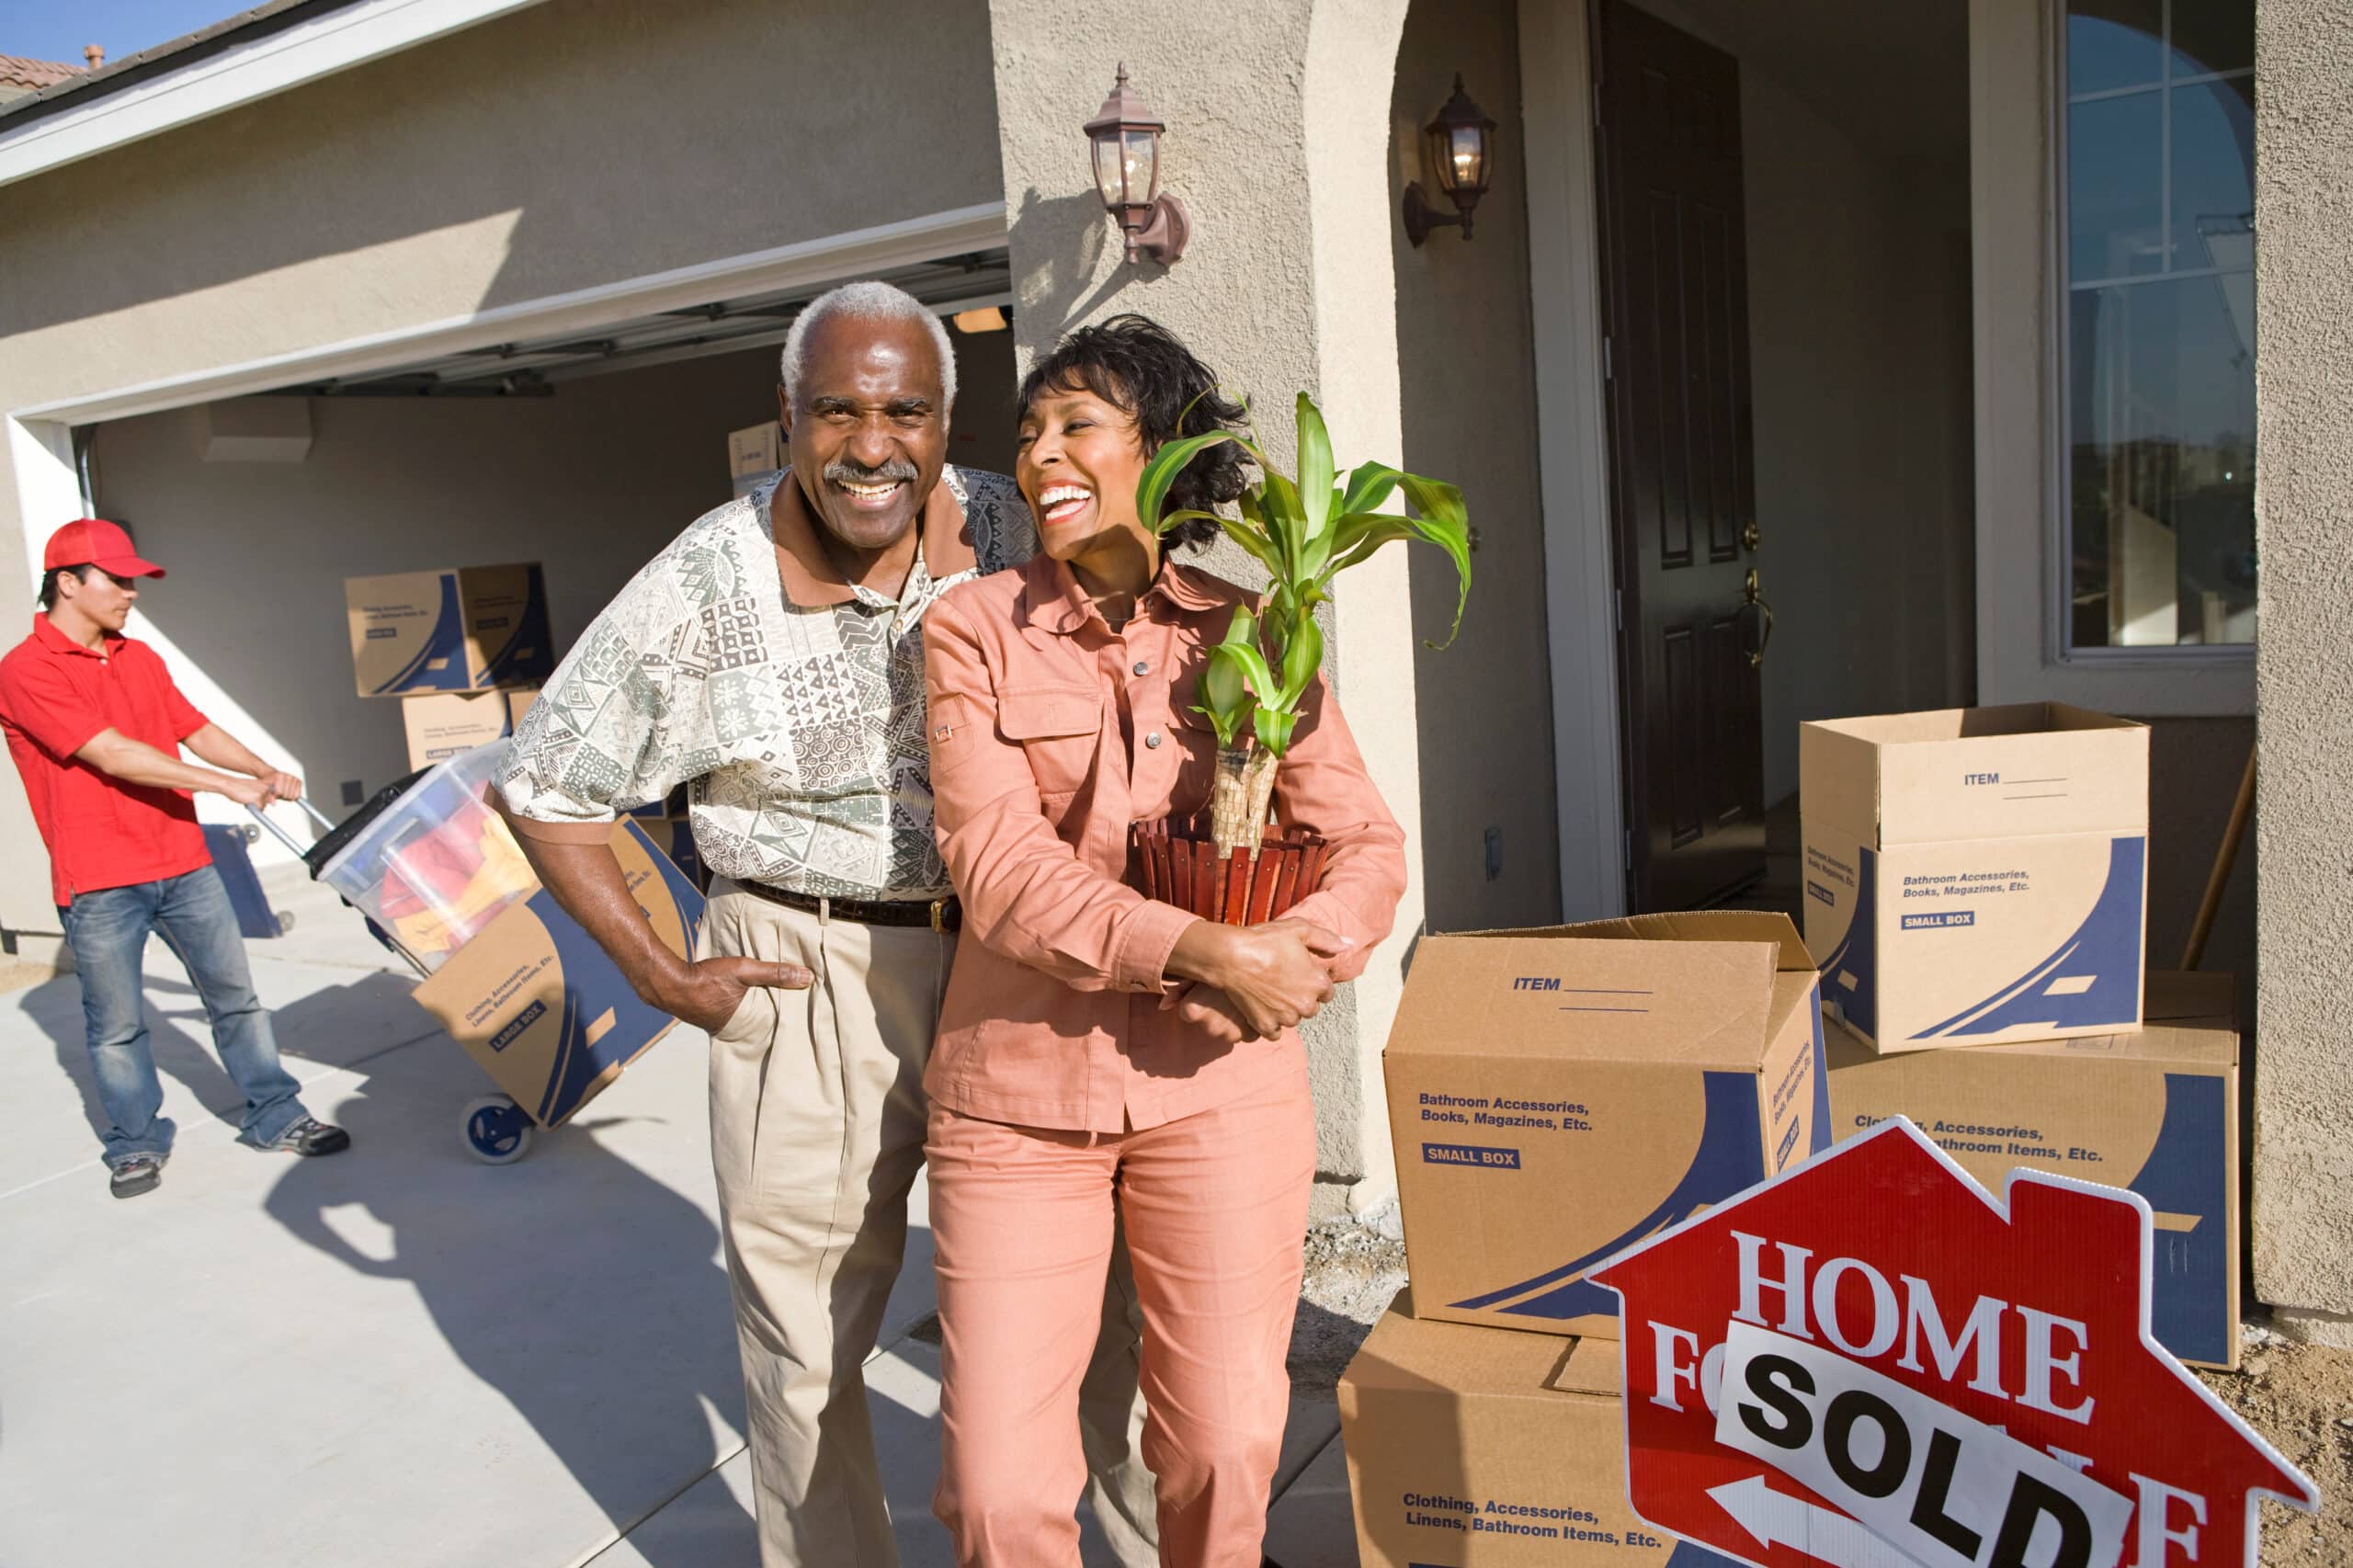 Downsize your home for a happier relocation